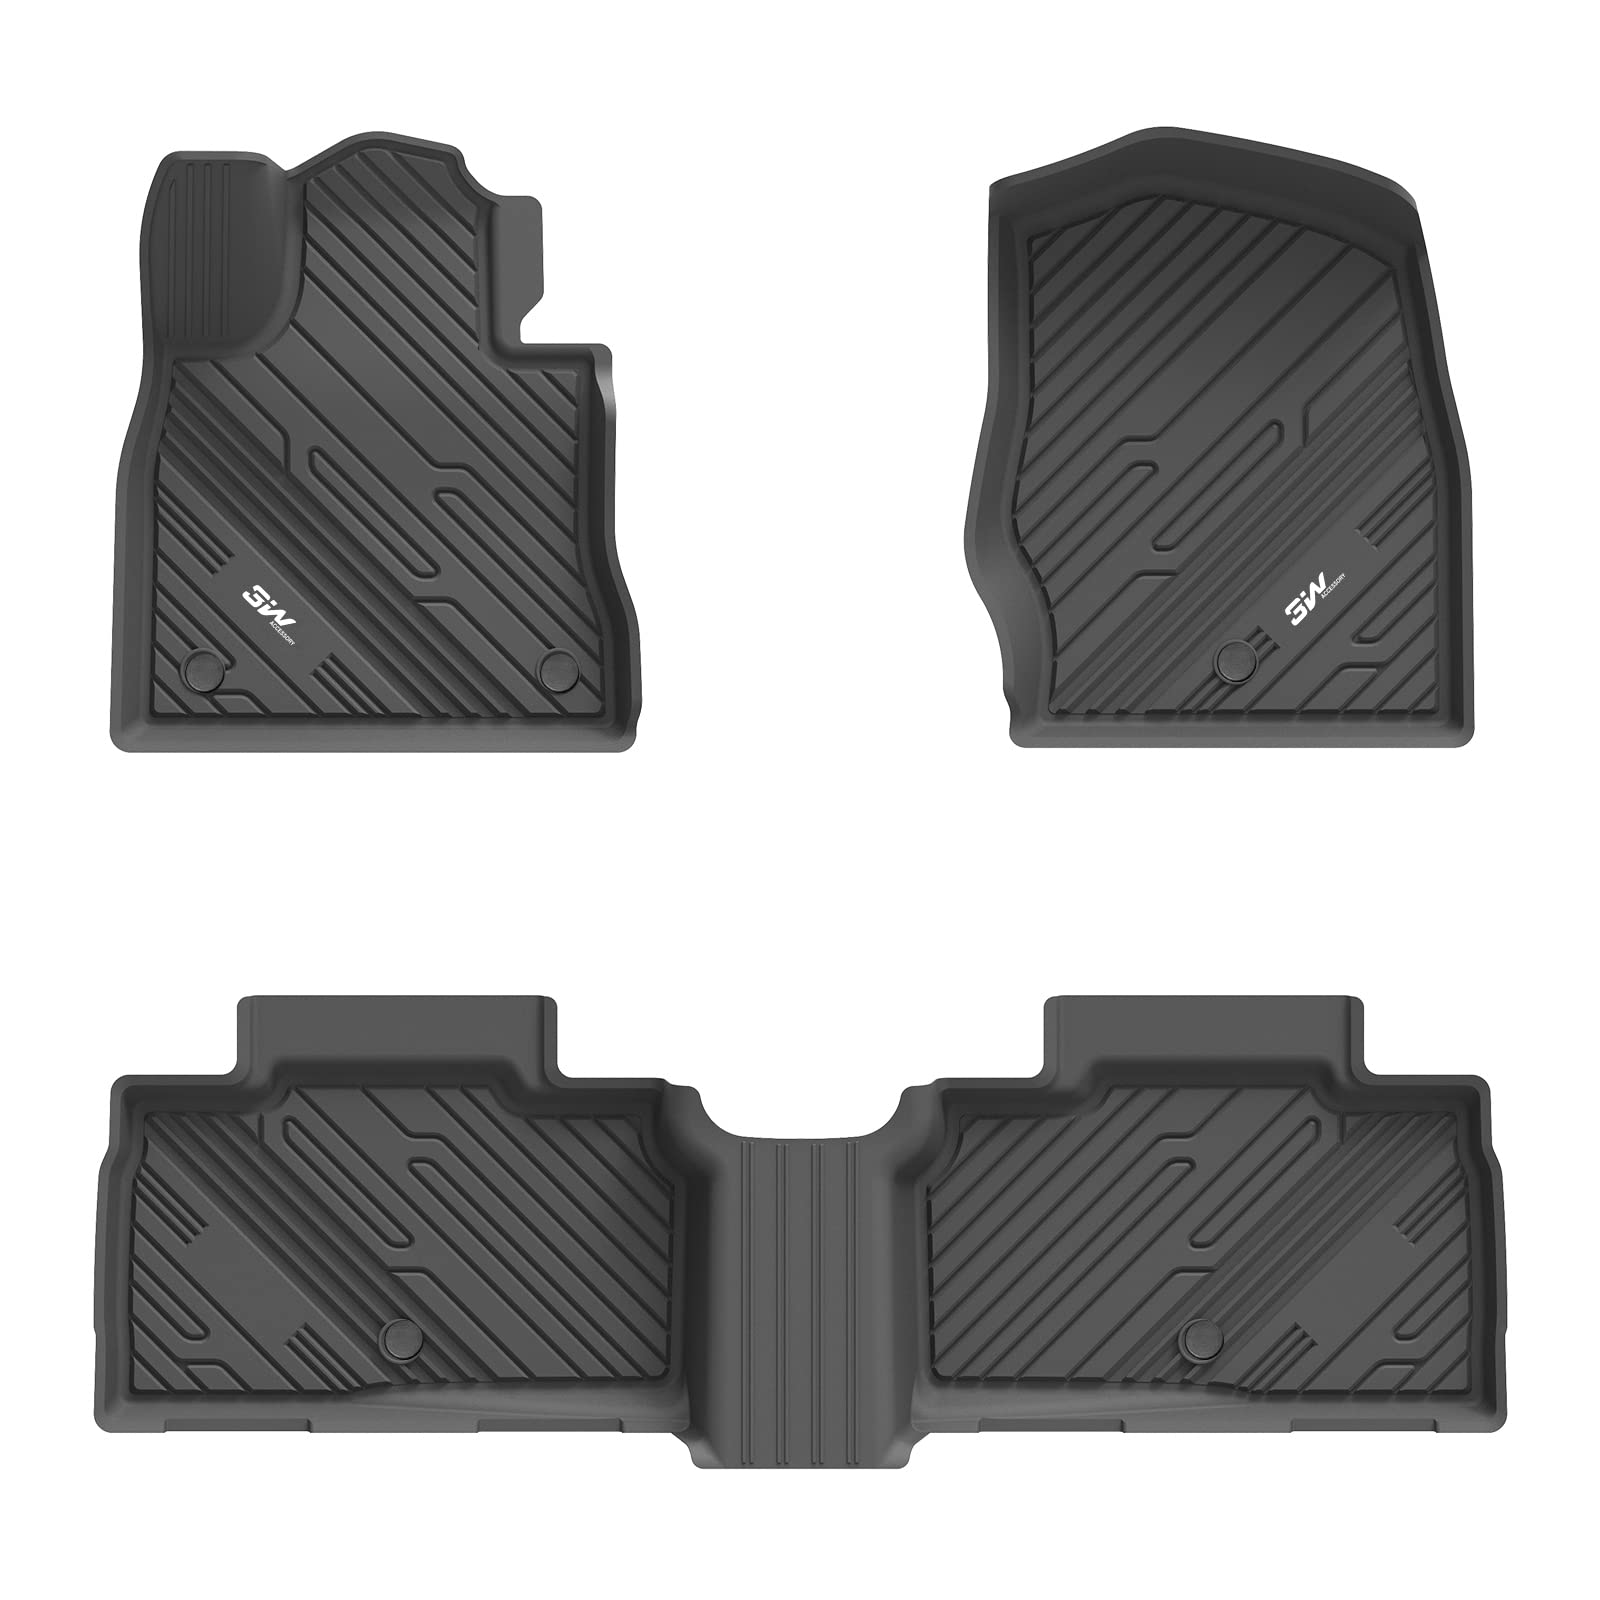 3W Ford Explorer 2020-2023 Custom Floor Mats TPE Material & All-Weather Protection Vehicles & Parts 3W 2020-2023 Explorer 2020-2023 7 Seat 1st&2nd Row Mats